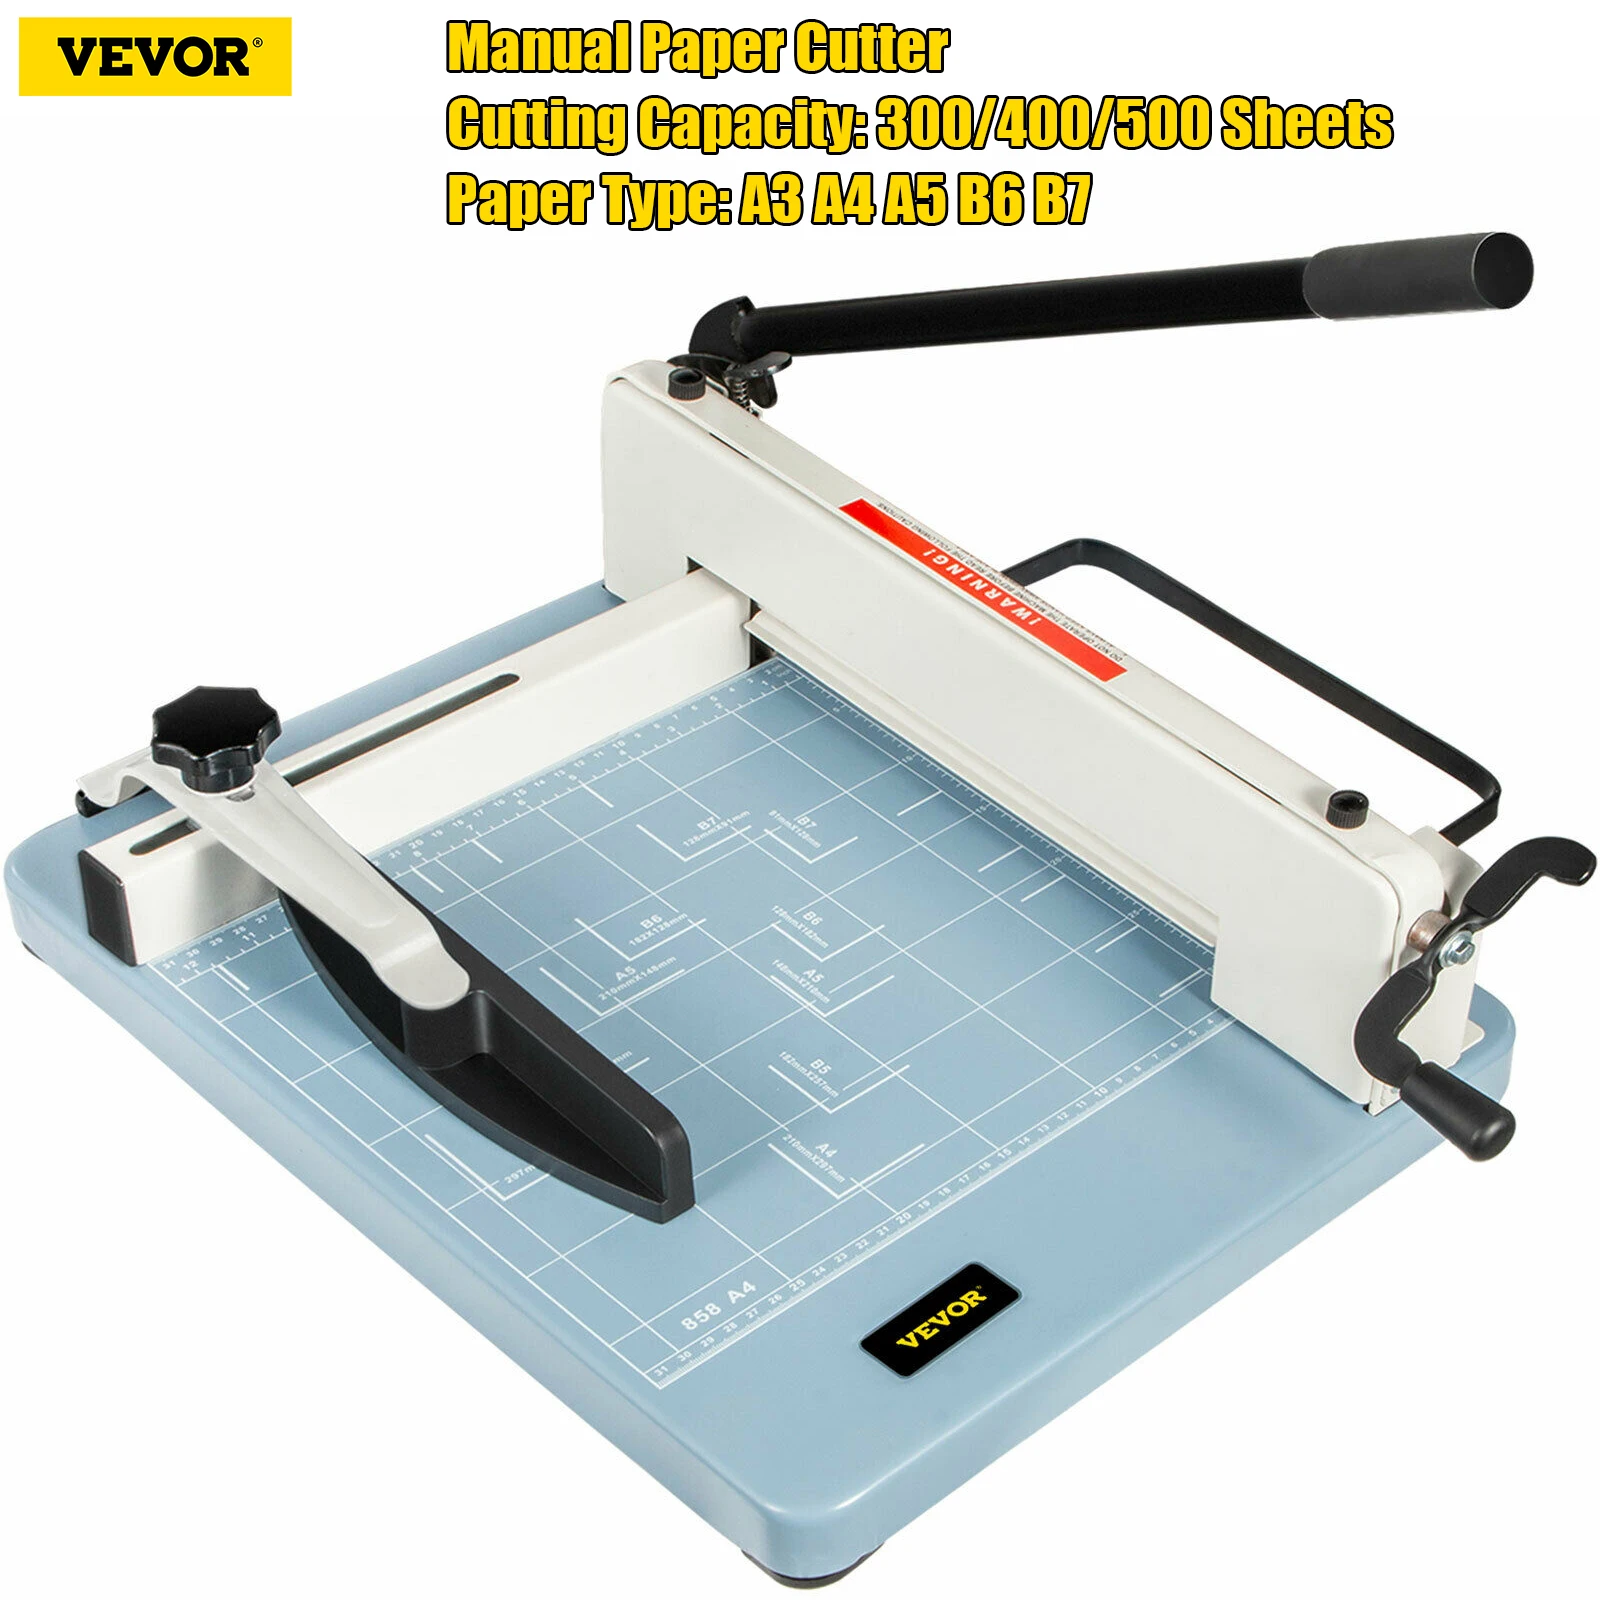 

VEVOR 12/17 Inch Manual Paper Cutter Guillotine Trimmer Heavy Duty 300-500 Sheets Shredder for Factory School Office Accessories